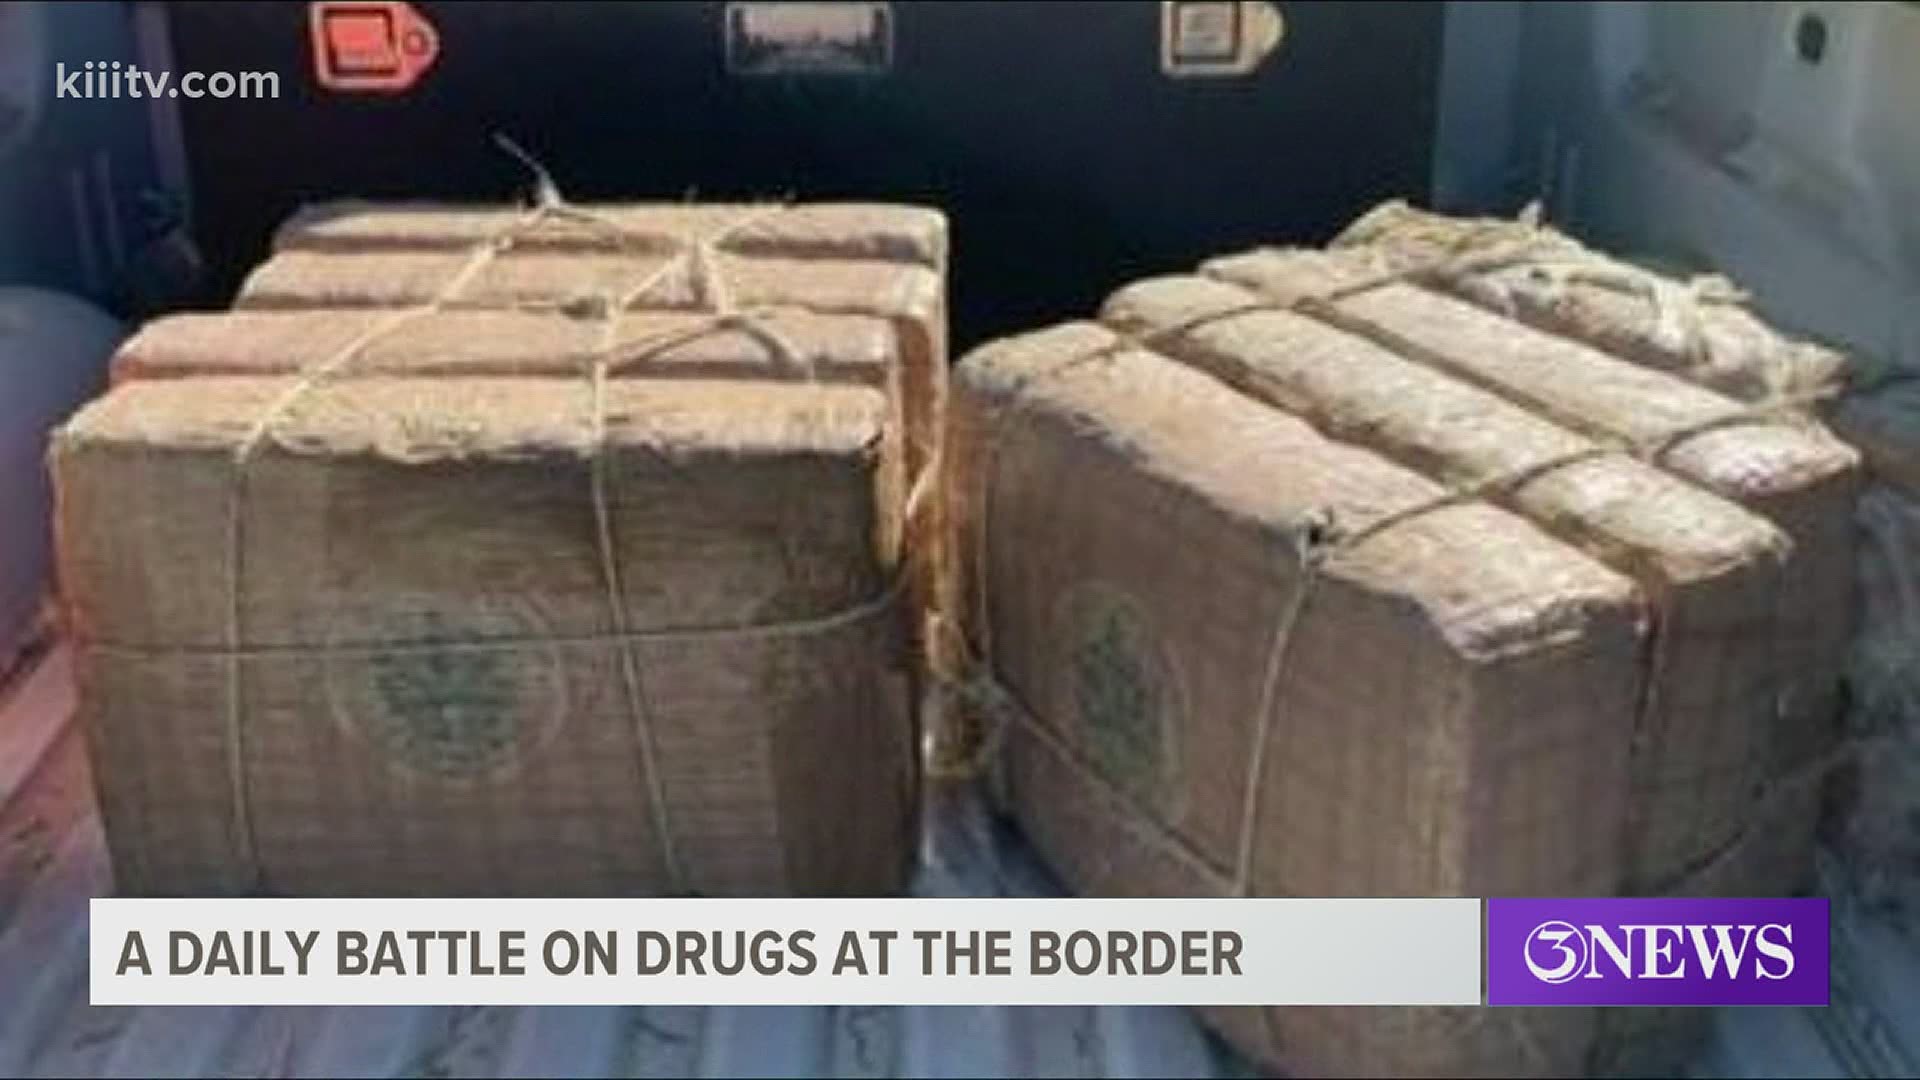 Border patrol says it has a total of 3,000 agents covering the Rio Grande Valley sector. Many of those agents are working to stop the smuggling of illegal drugs.